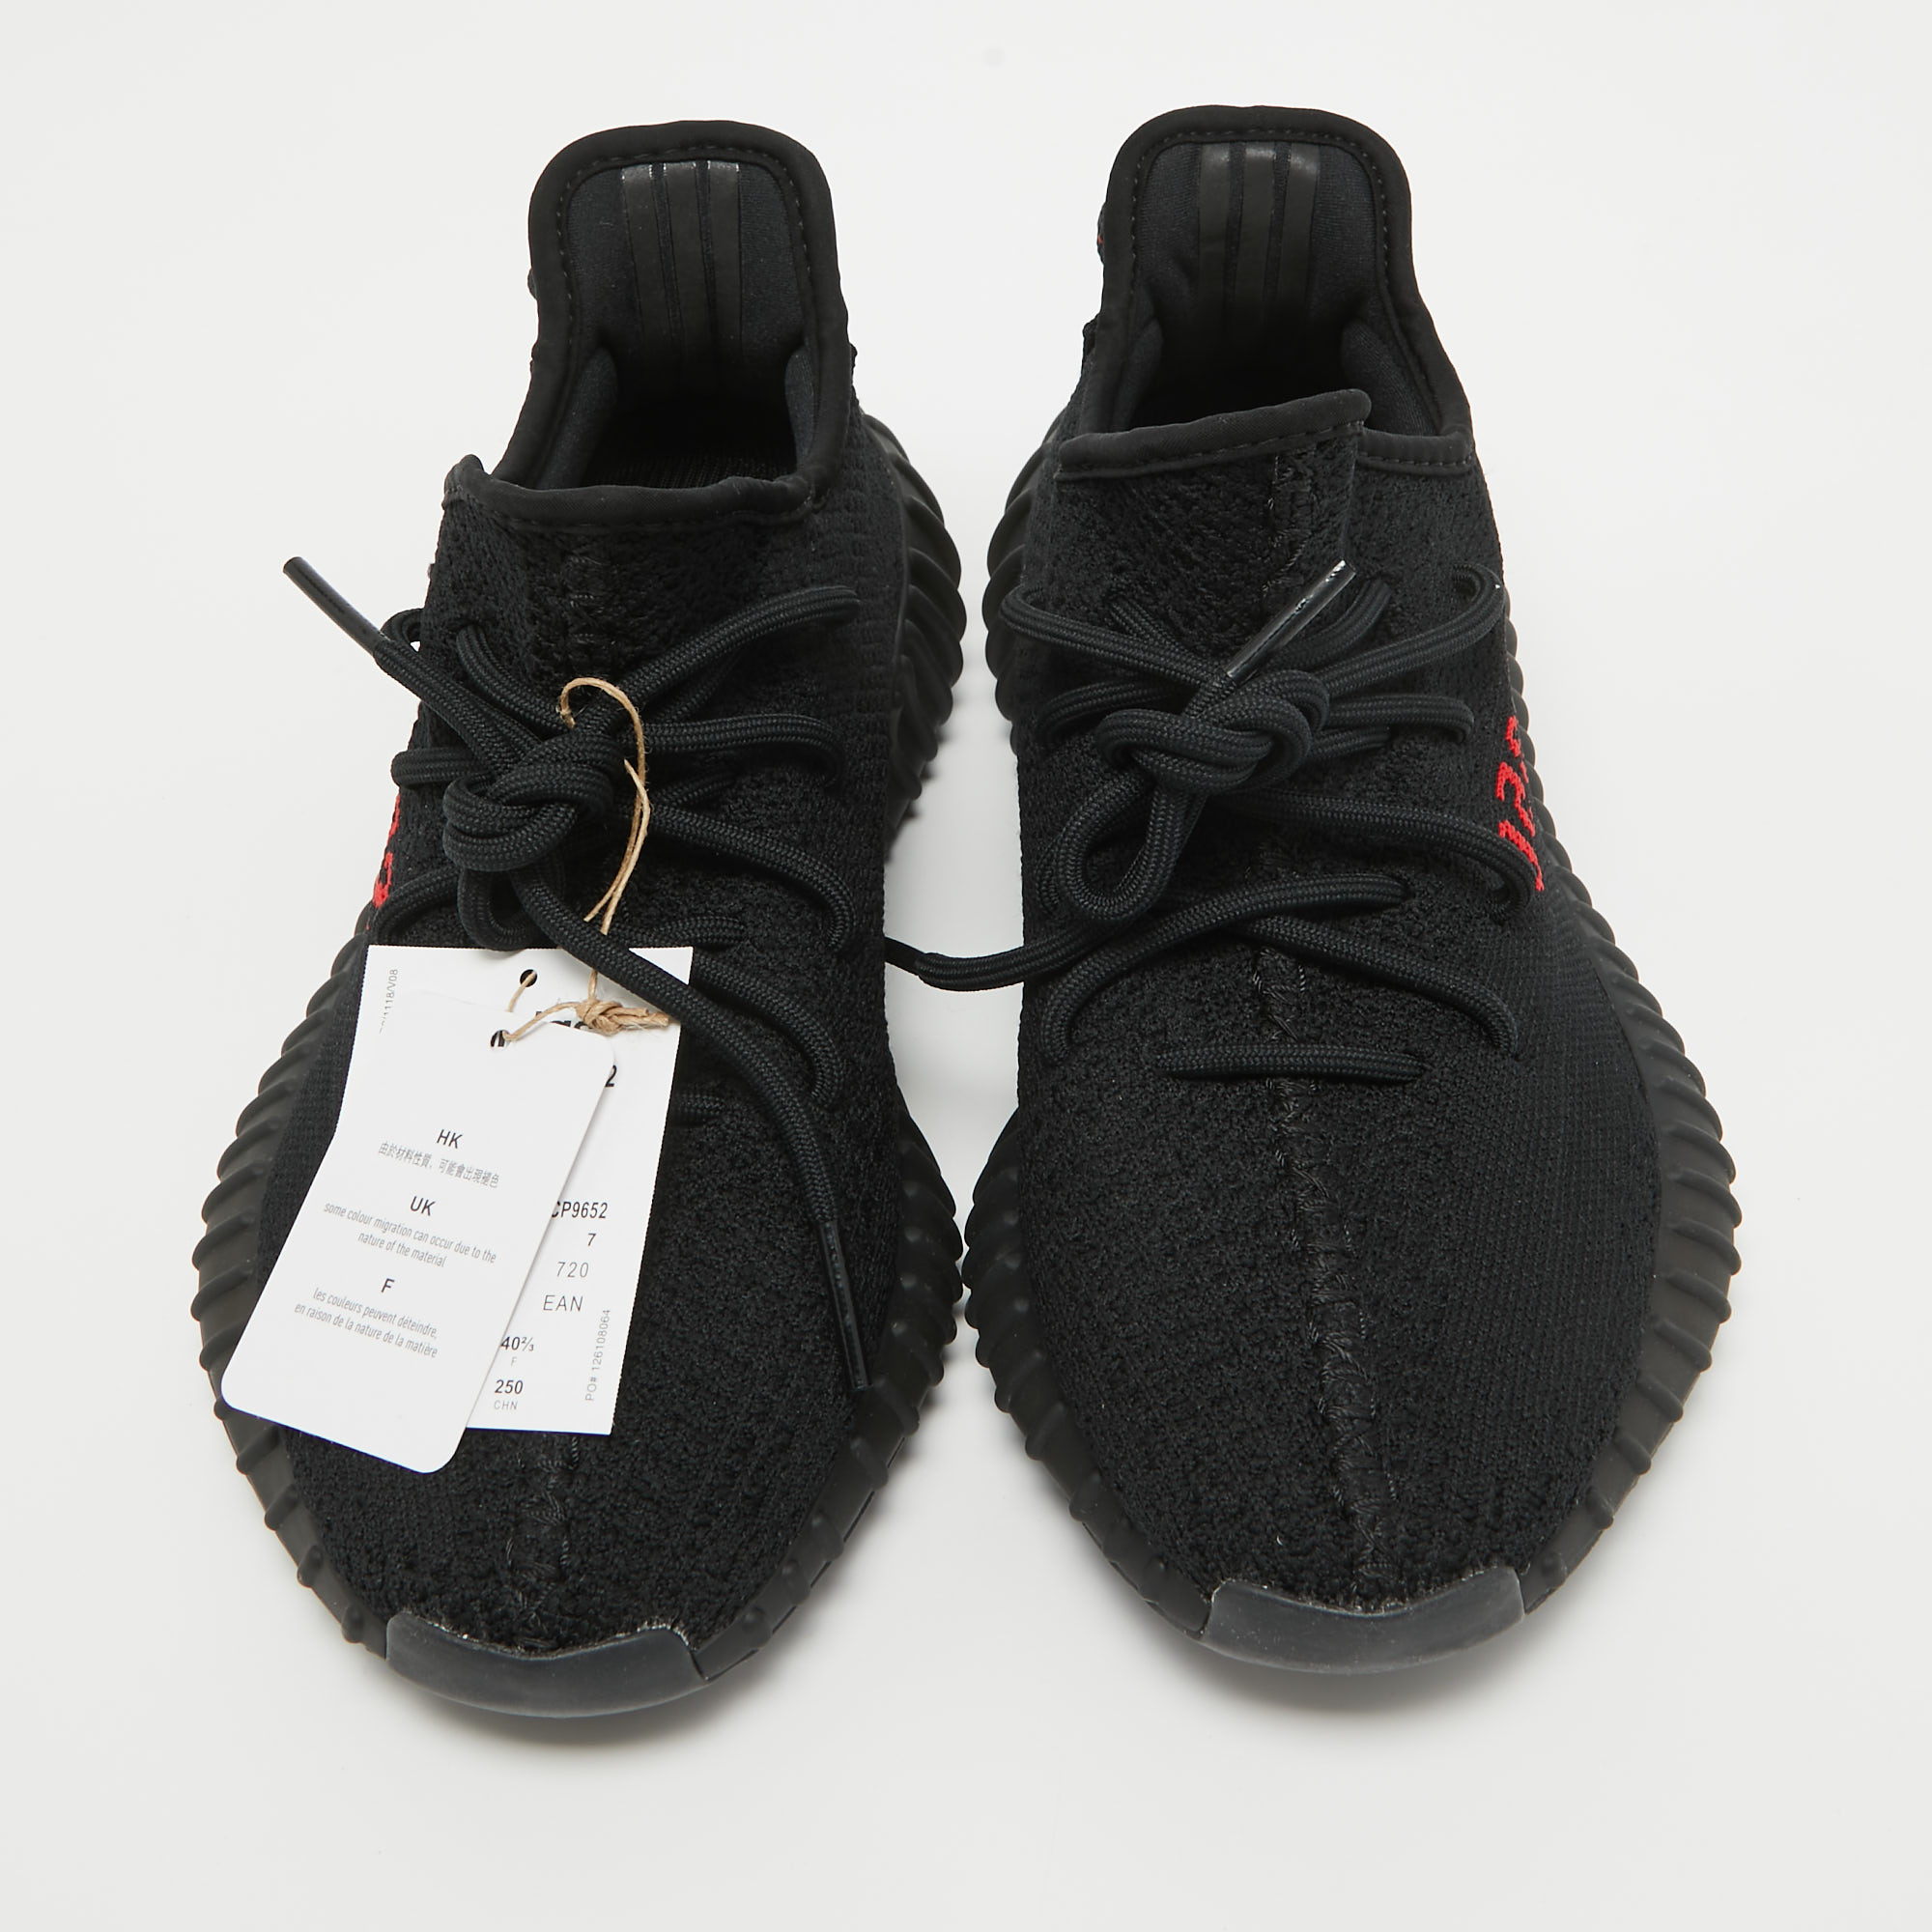 Yeezy X Adidas Black/Red Knit Fabric Boost 350 V2 Bred Sneakers Size 40 2/3